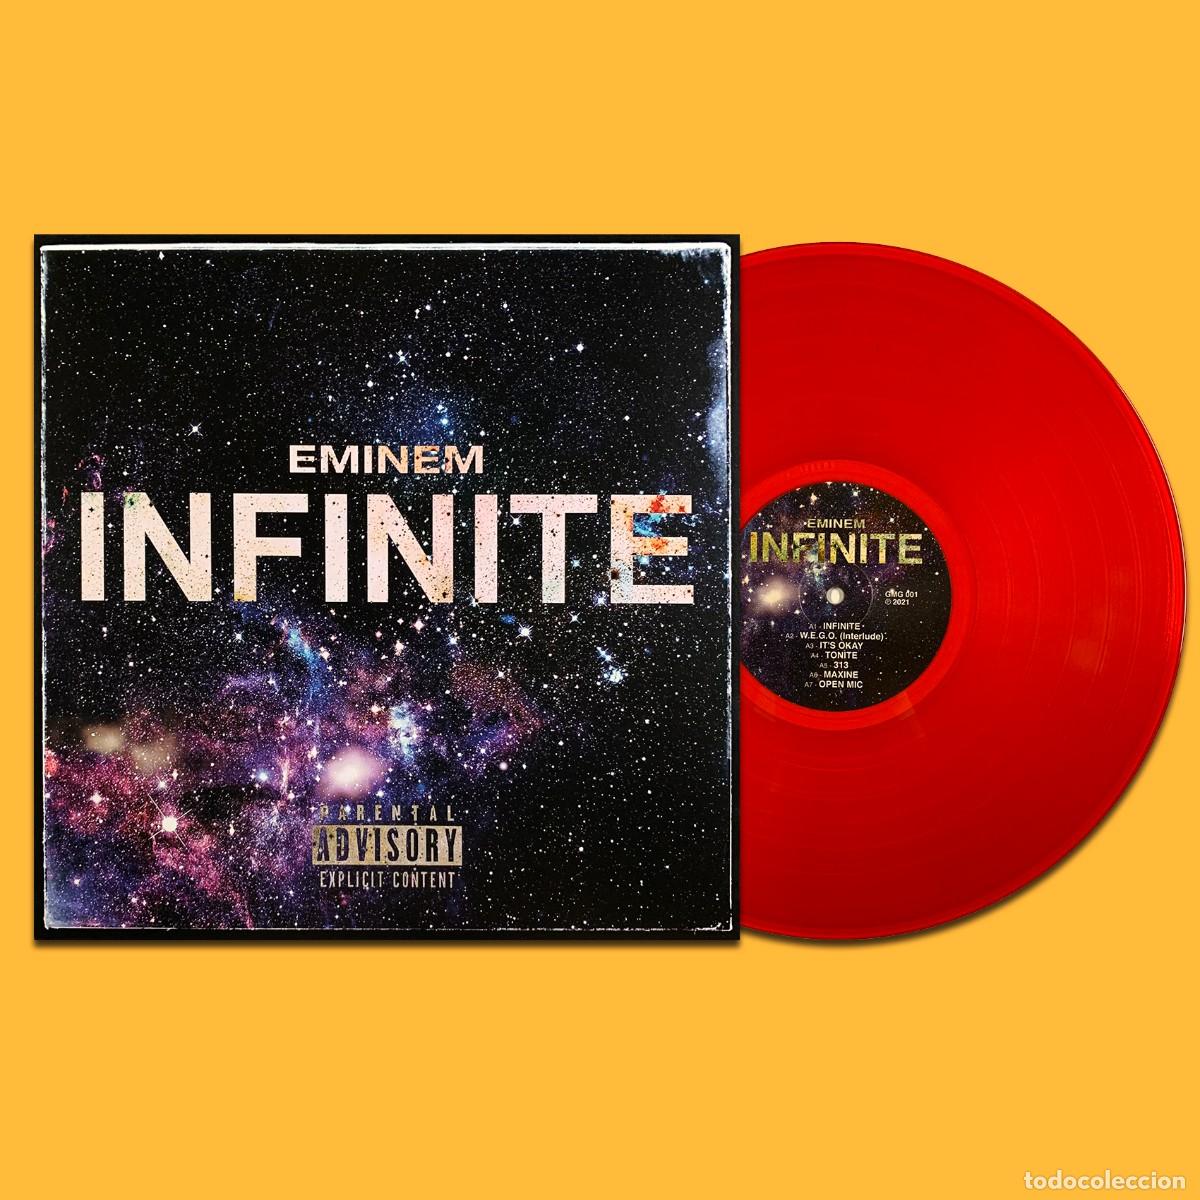 1996 Eminem Signed, Factory-Sealed Infinite Vinyl Record - Debut Album in  Limited-Edition 1st Pressing of 250 Media/Radio Copies - AMG Excellent 8,  Beckett LOA - Portion of Proceeds to Benefit Marshall Mathers